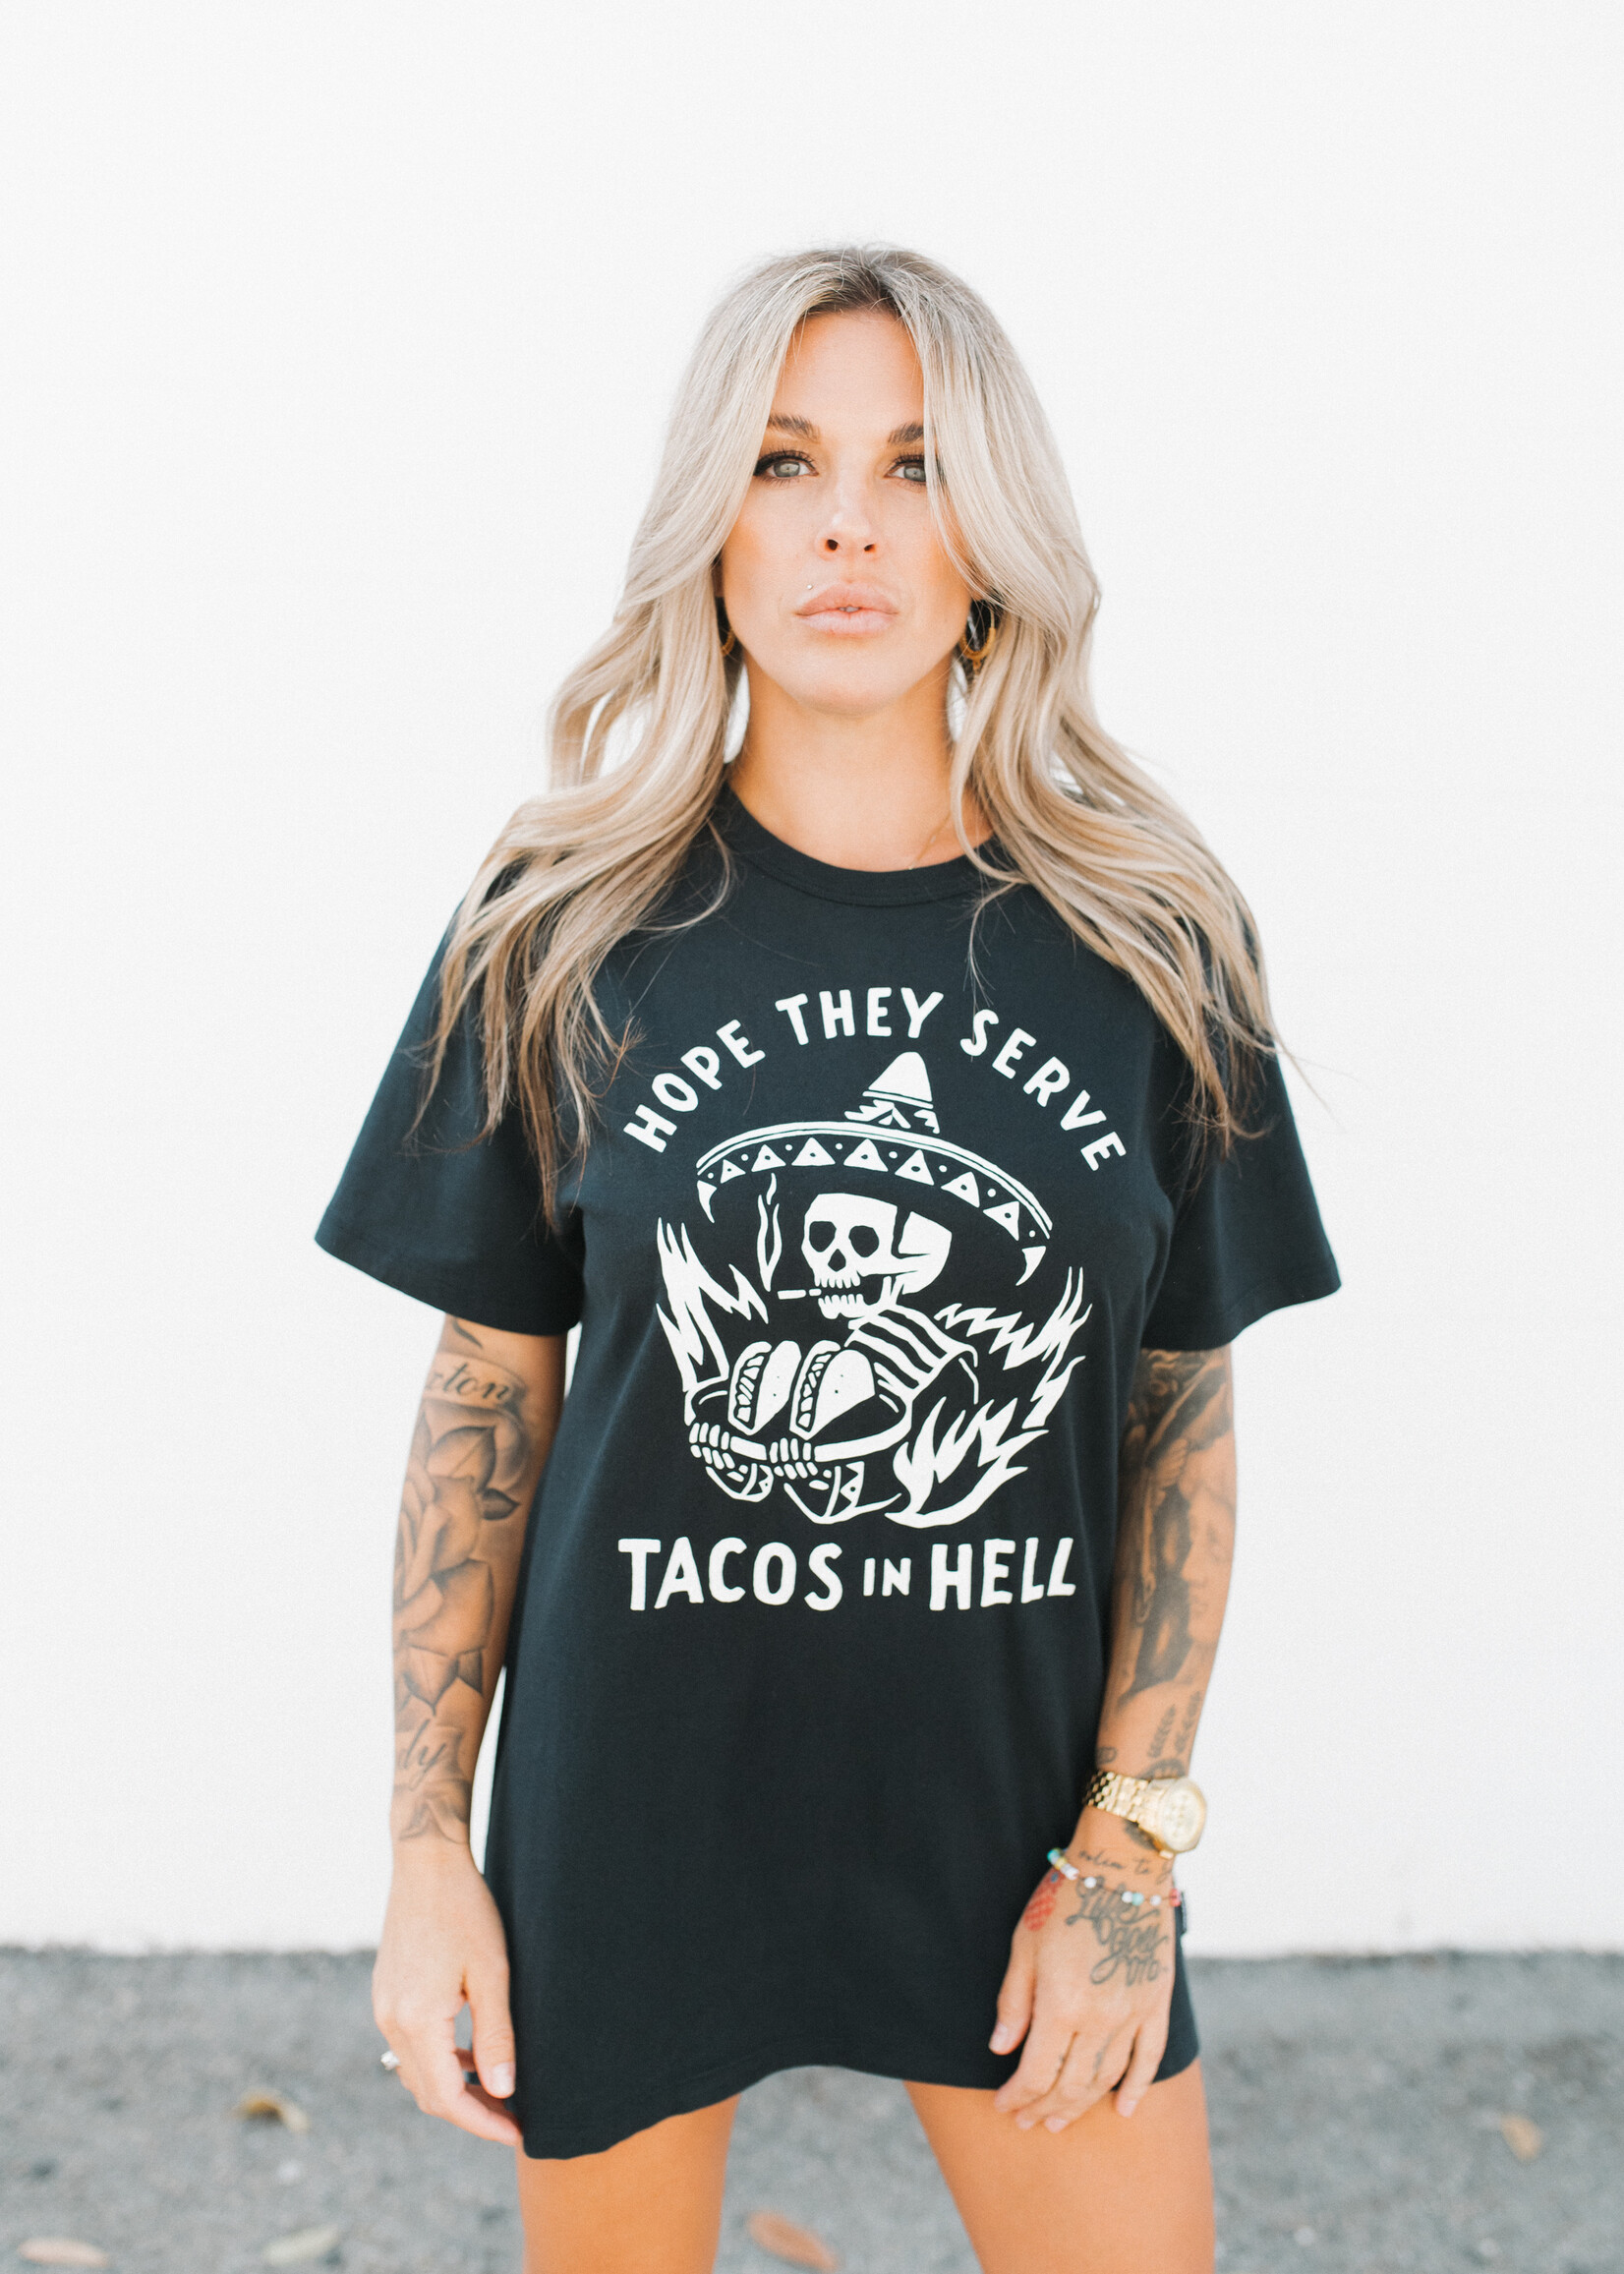 Tacos in hell